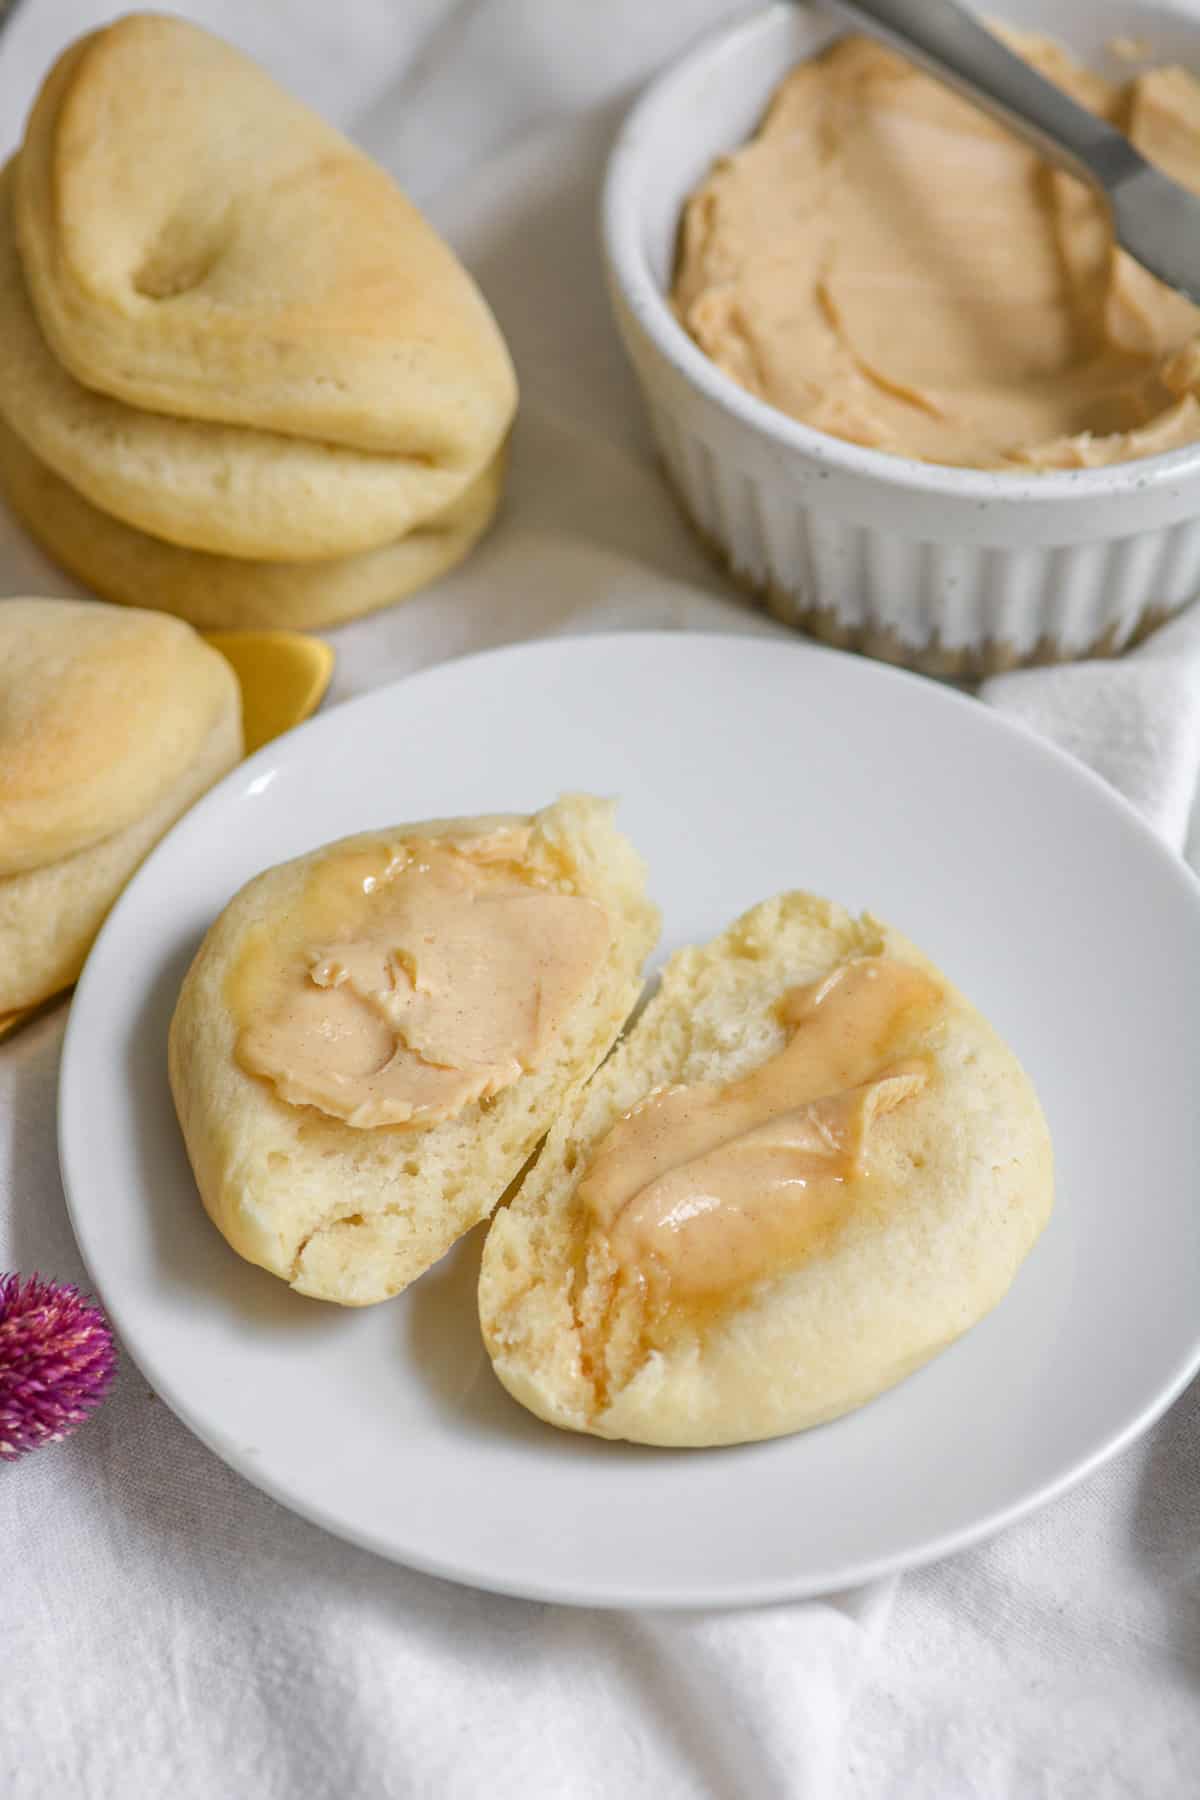 A parker house roll spread with vegan cinnamon honey butter